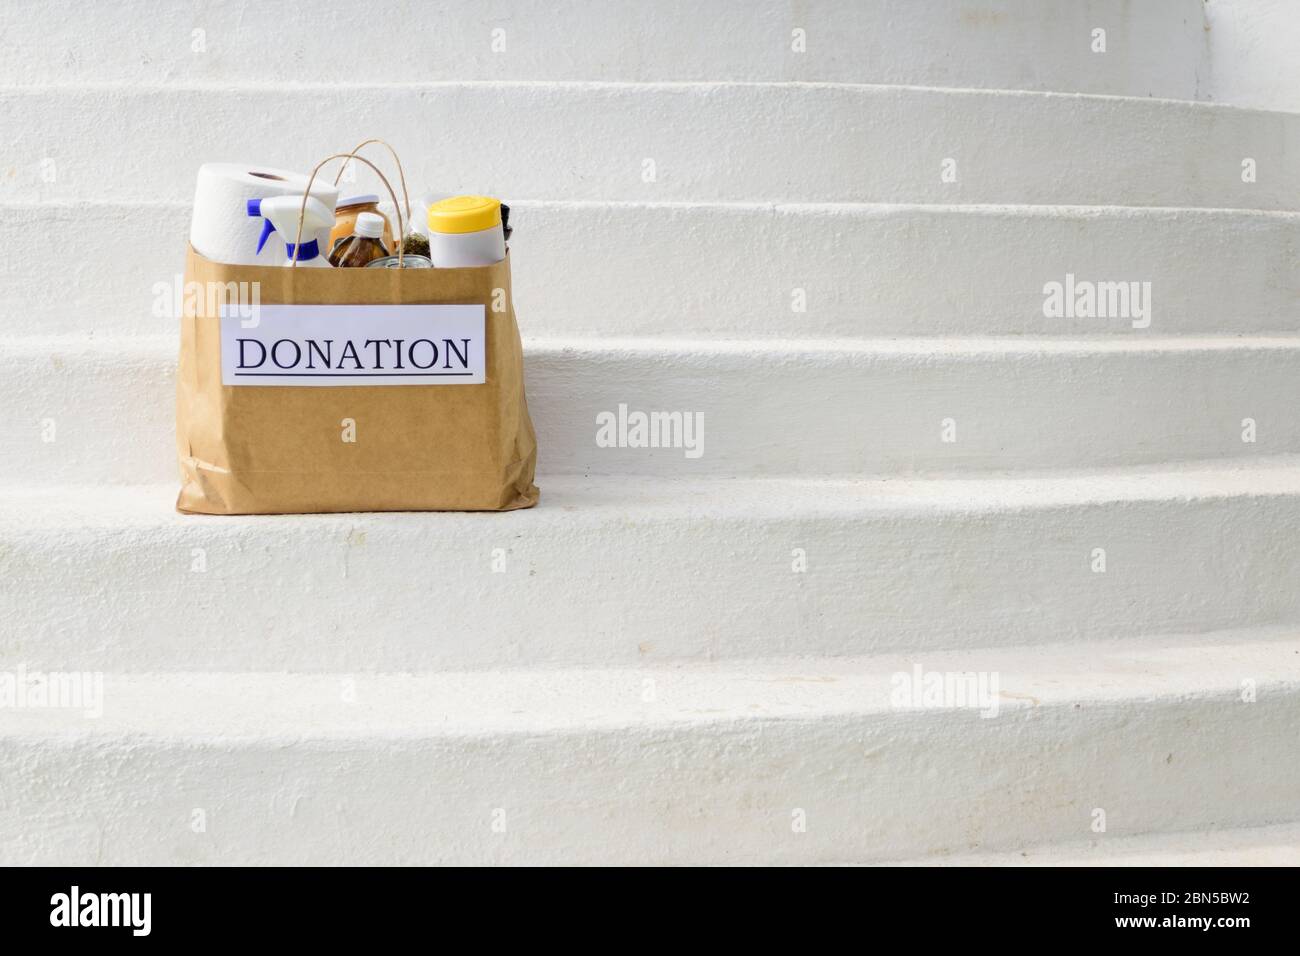 A donation bag filled with food and cleaning supplies sits on white steps while being delivered during the Covid-19 / Coronavirus Pandemic Stock Photo